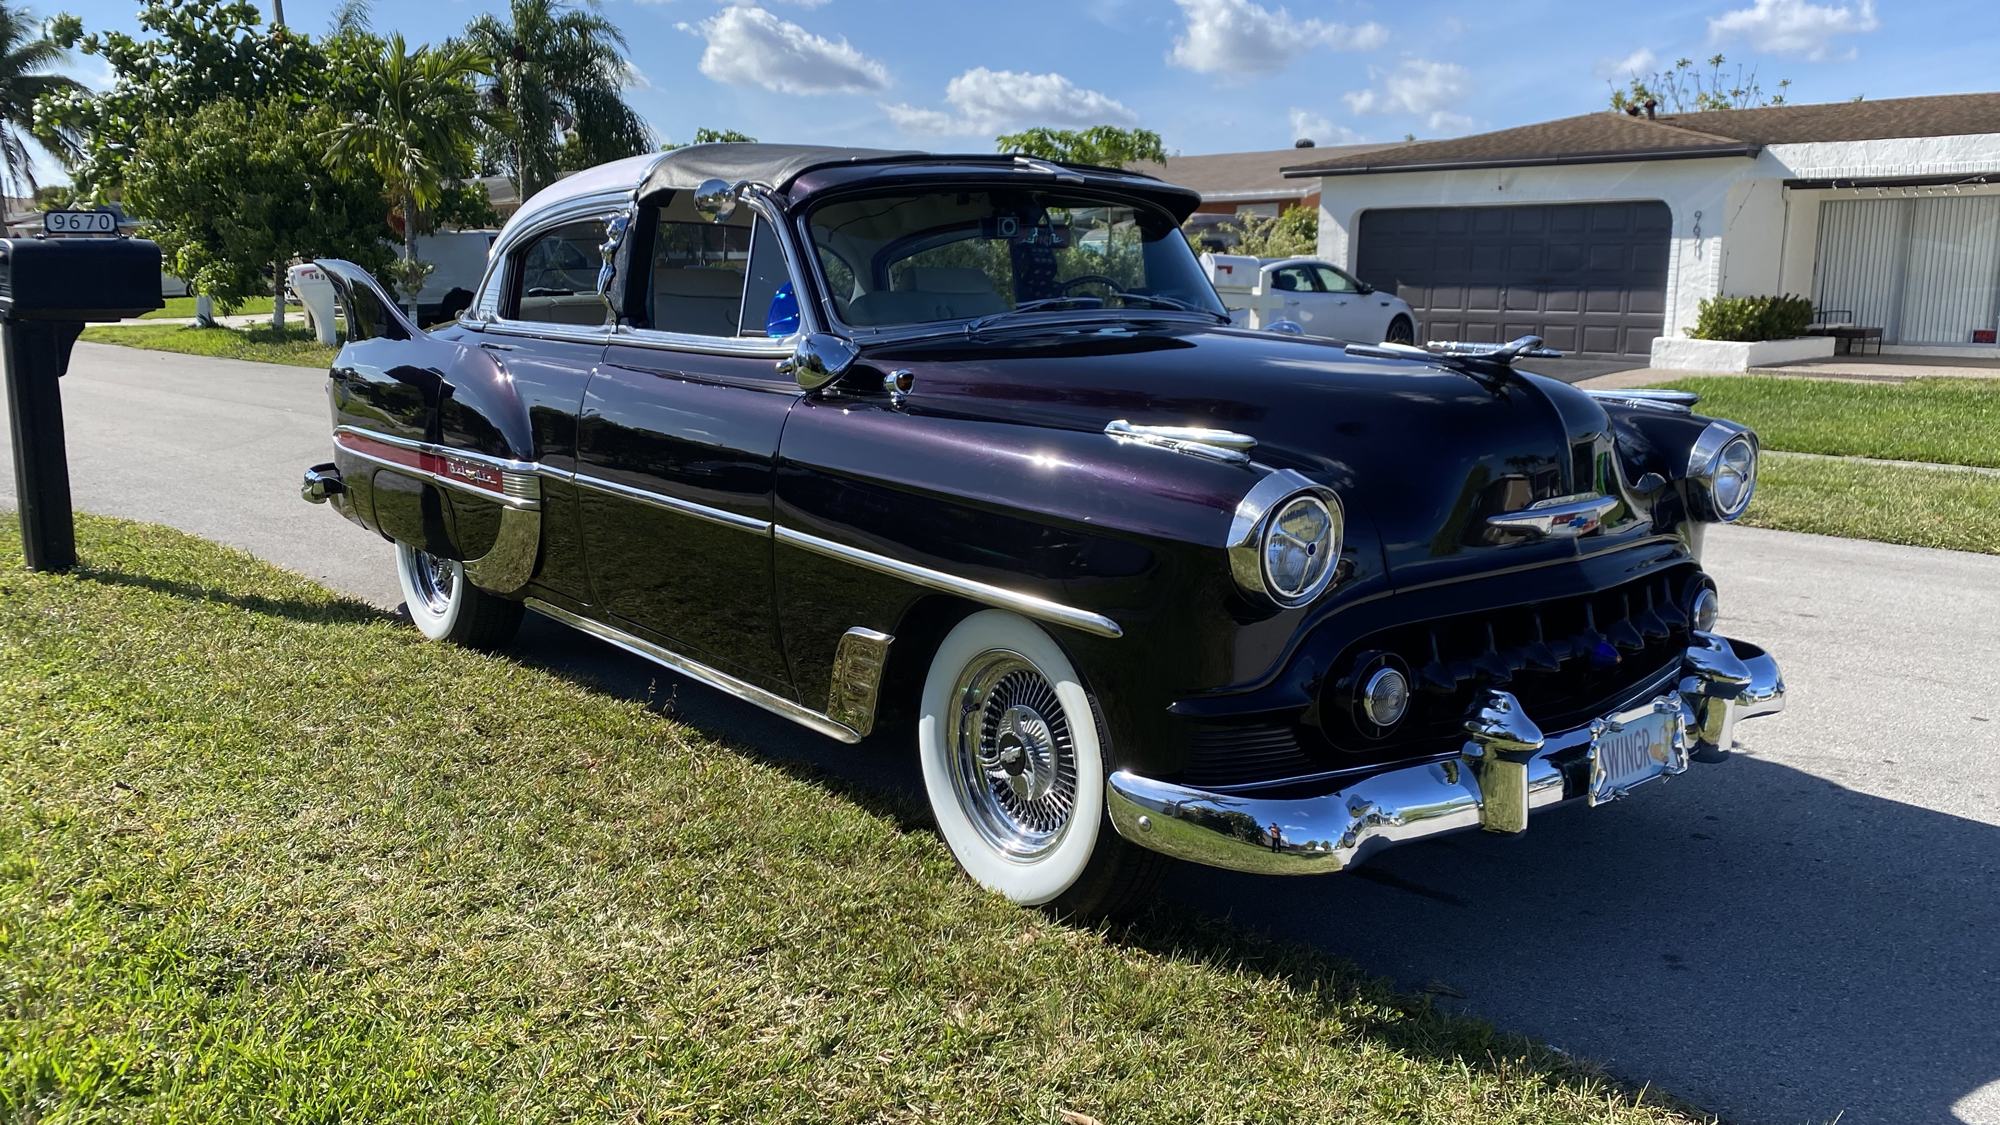 53 Chevy Custom Belair in the Sun, March 2021